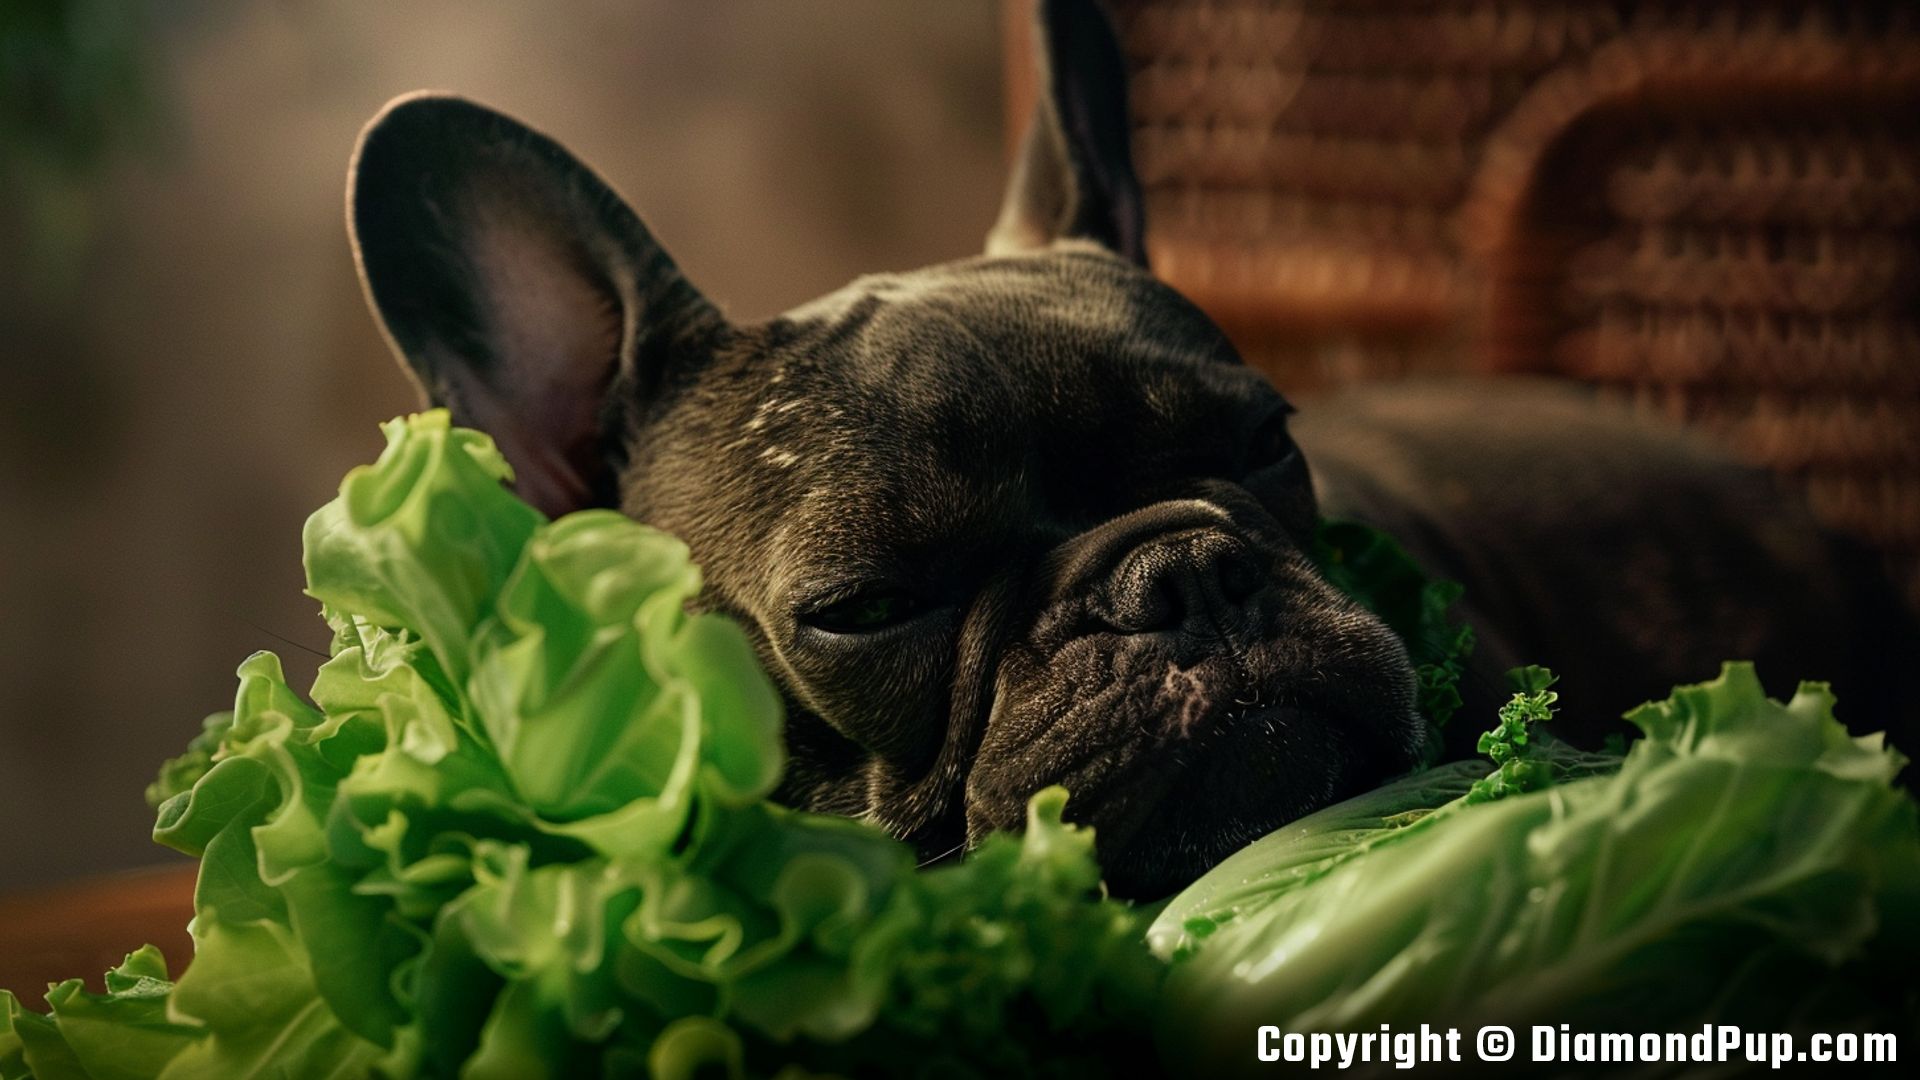 Photograph of an Adorable French Bulldog Snacking on Lettuce